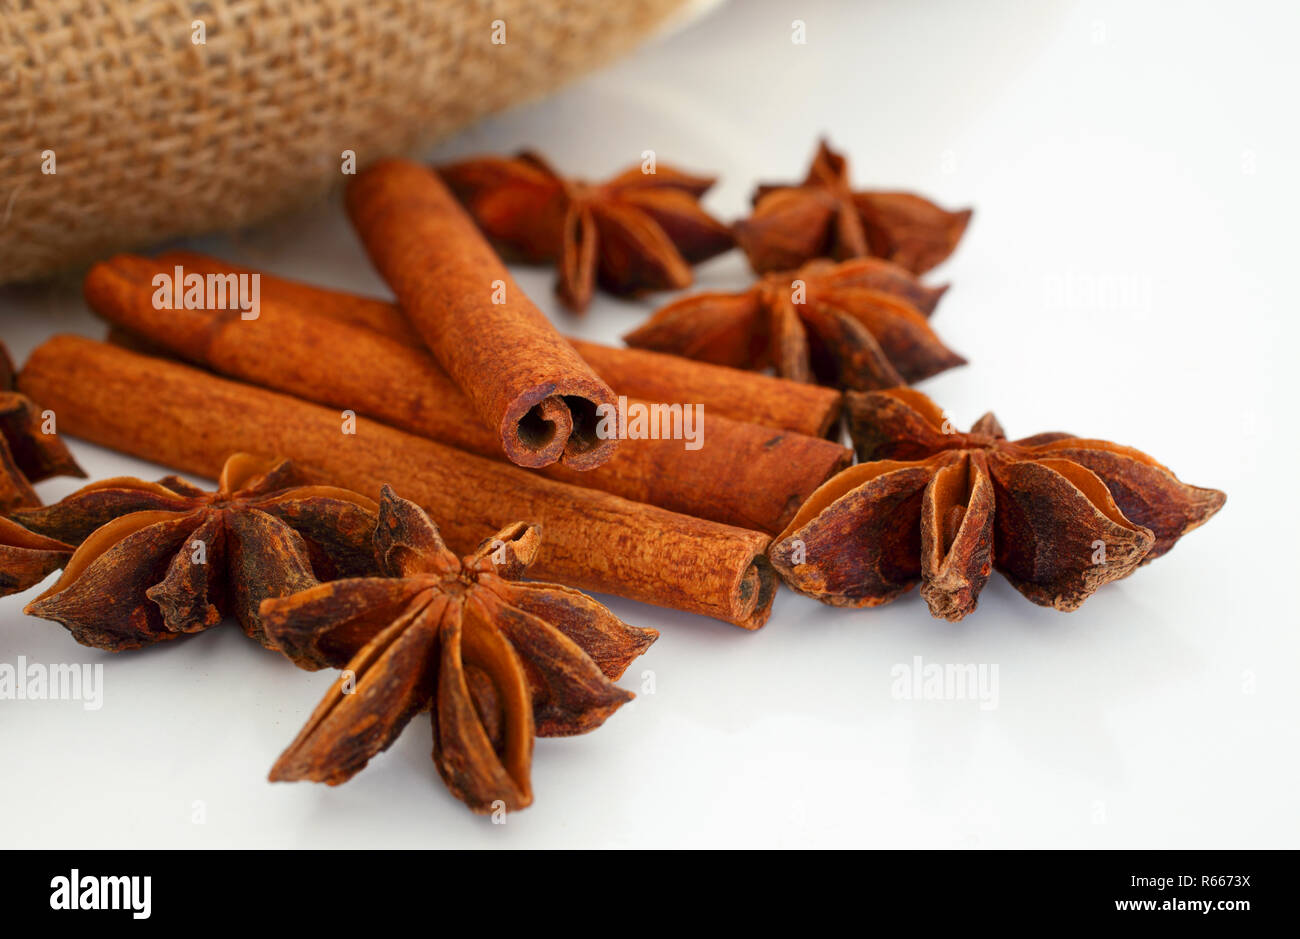 Cinnamon sticks and star aniseed on white reflective background with hessian bag. Selective focus. Macro. Stock Photo